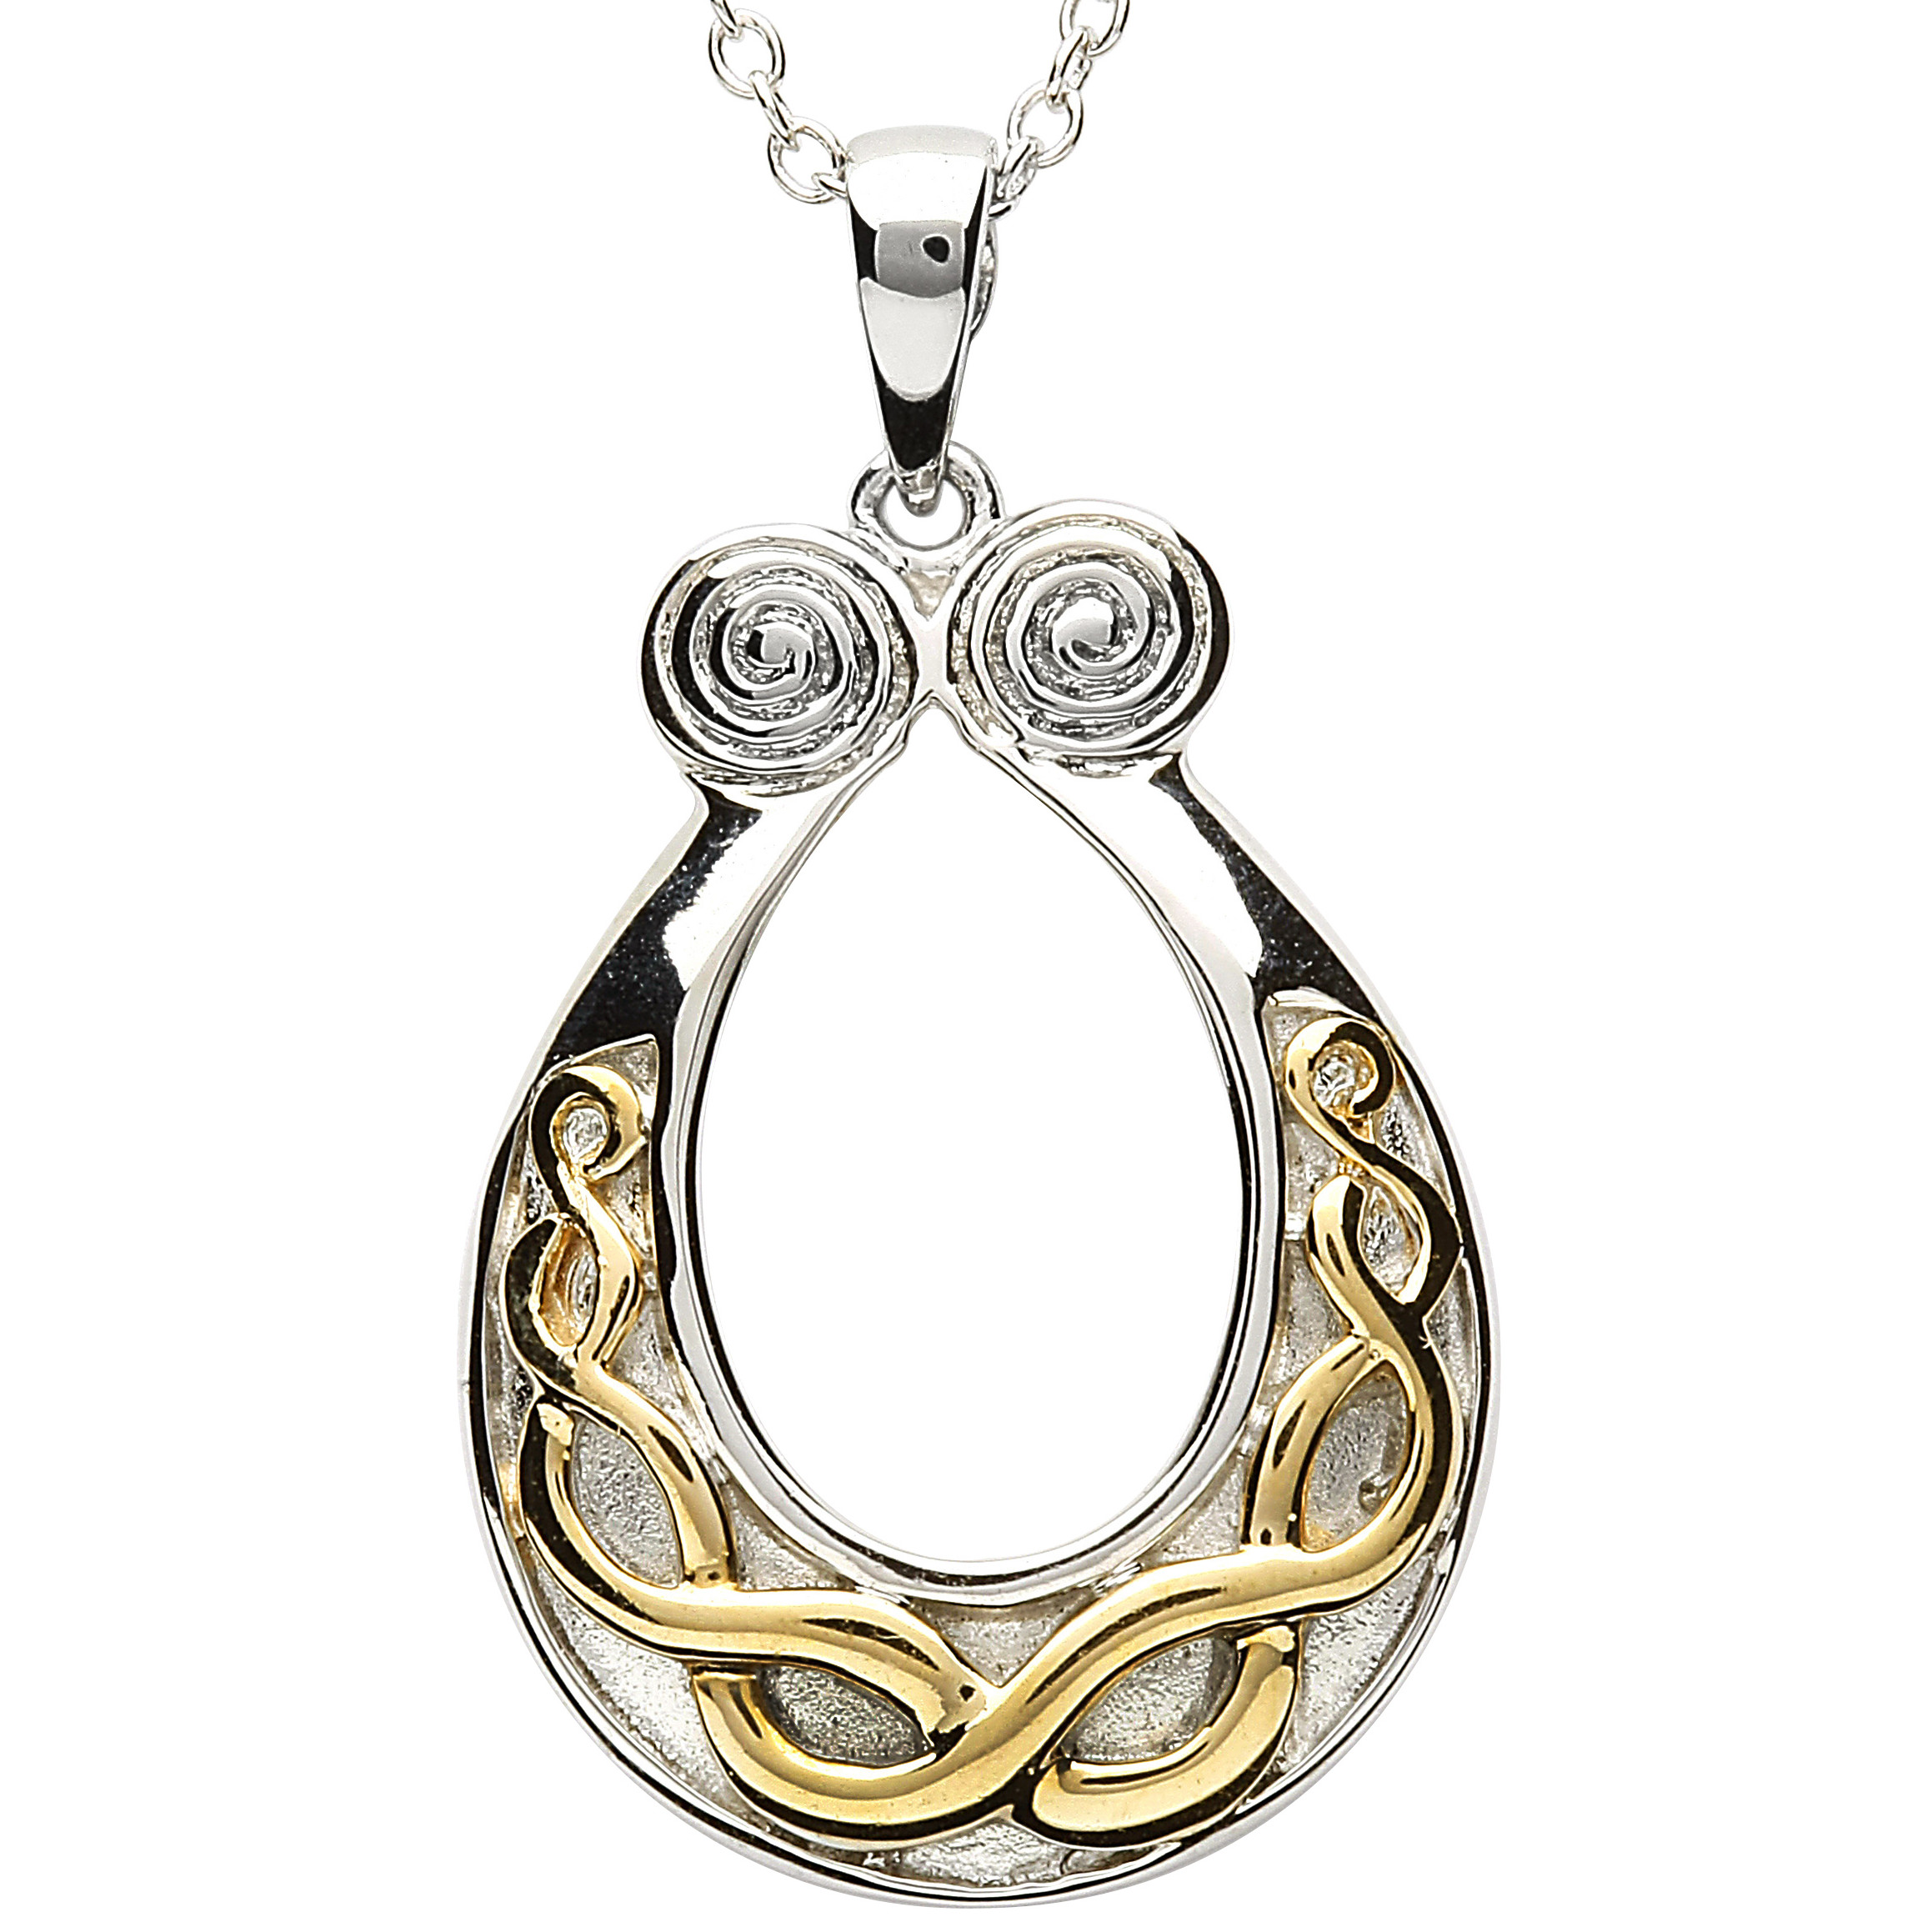 Product image for Celtic Pendant - Sterling Silver Celtic Knot Gold Plate Pendant with Chain